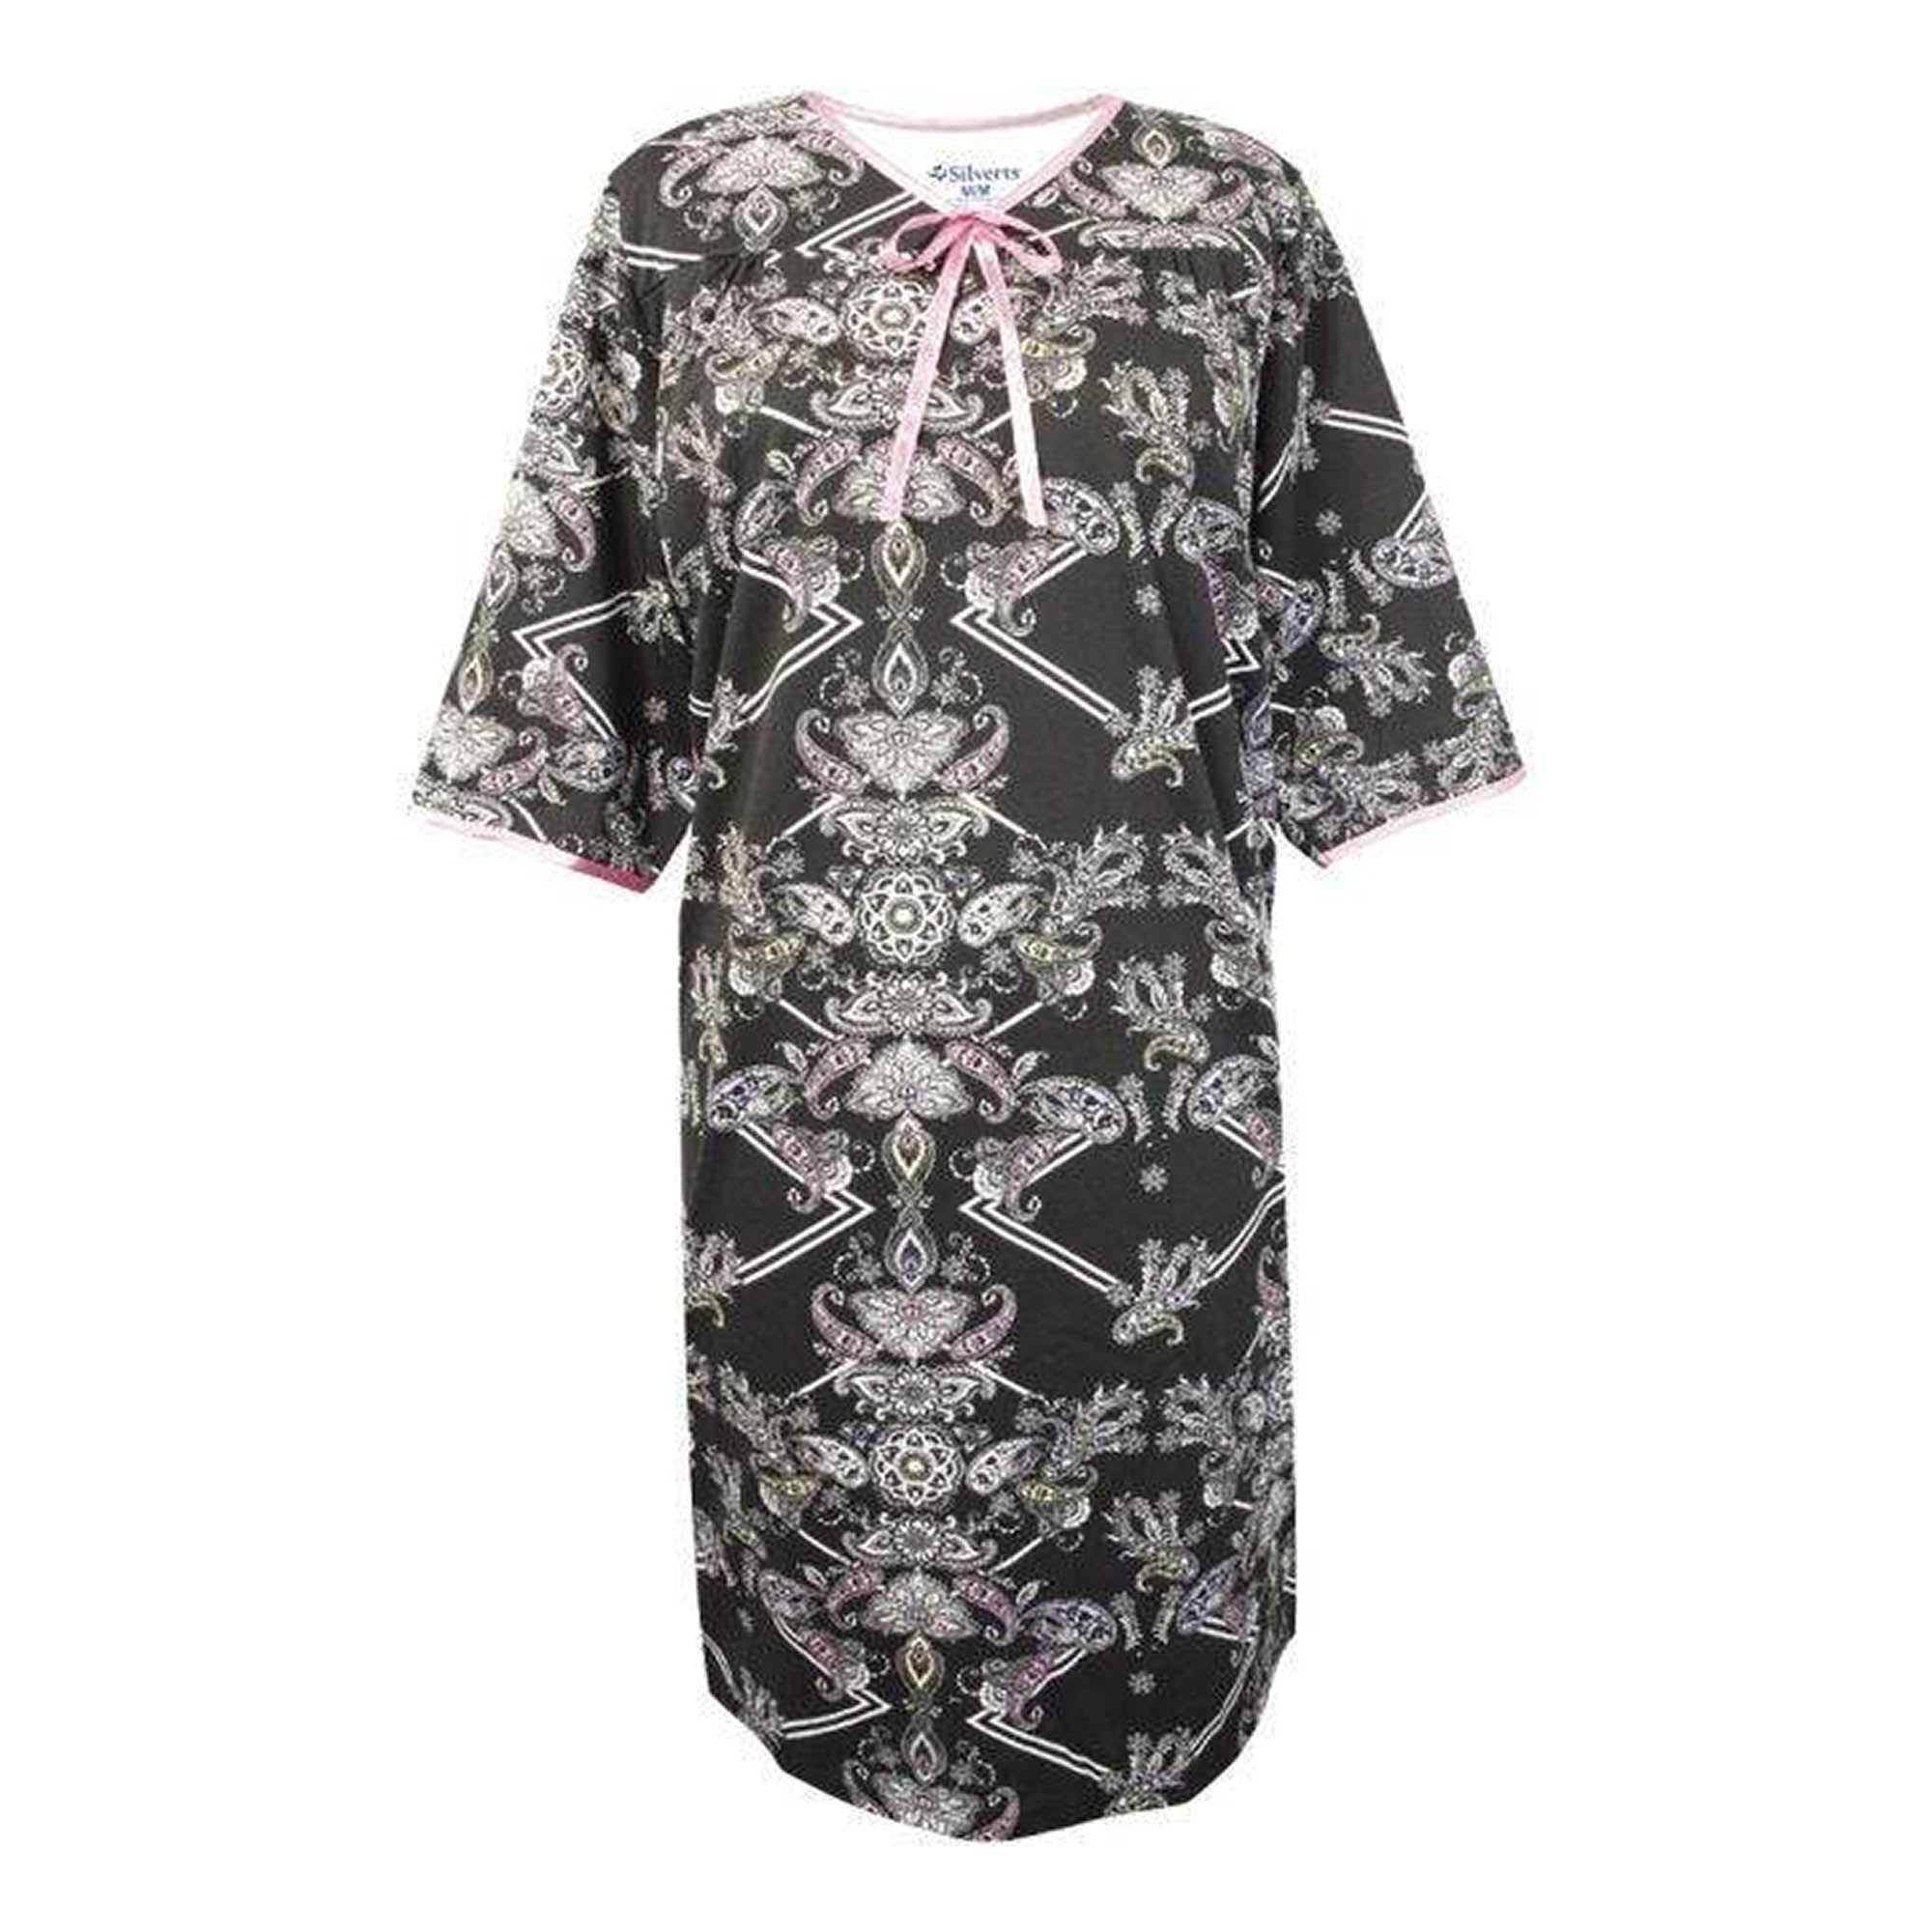 Silverts Women's Open Back Antimicrobial Nightgown - Adaptive Clothing - Perfect Paisley - L